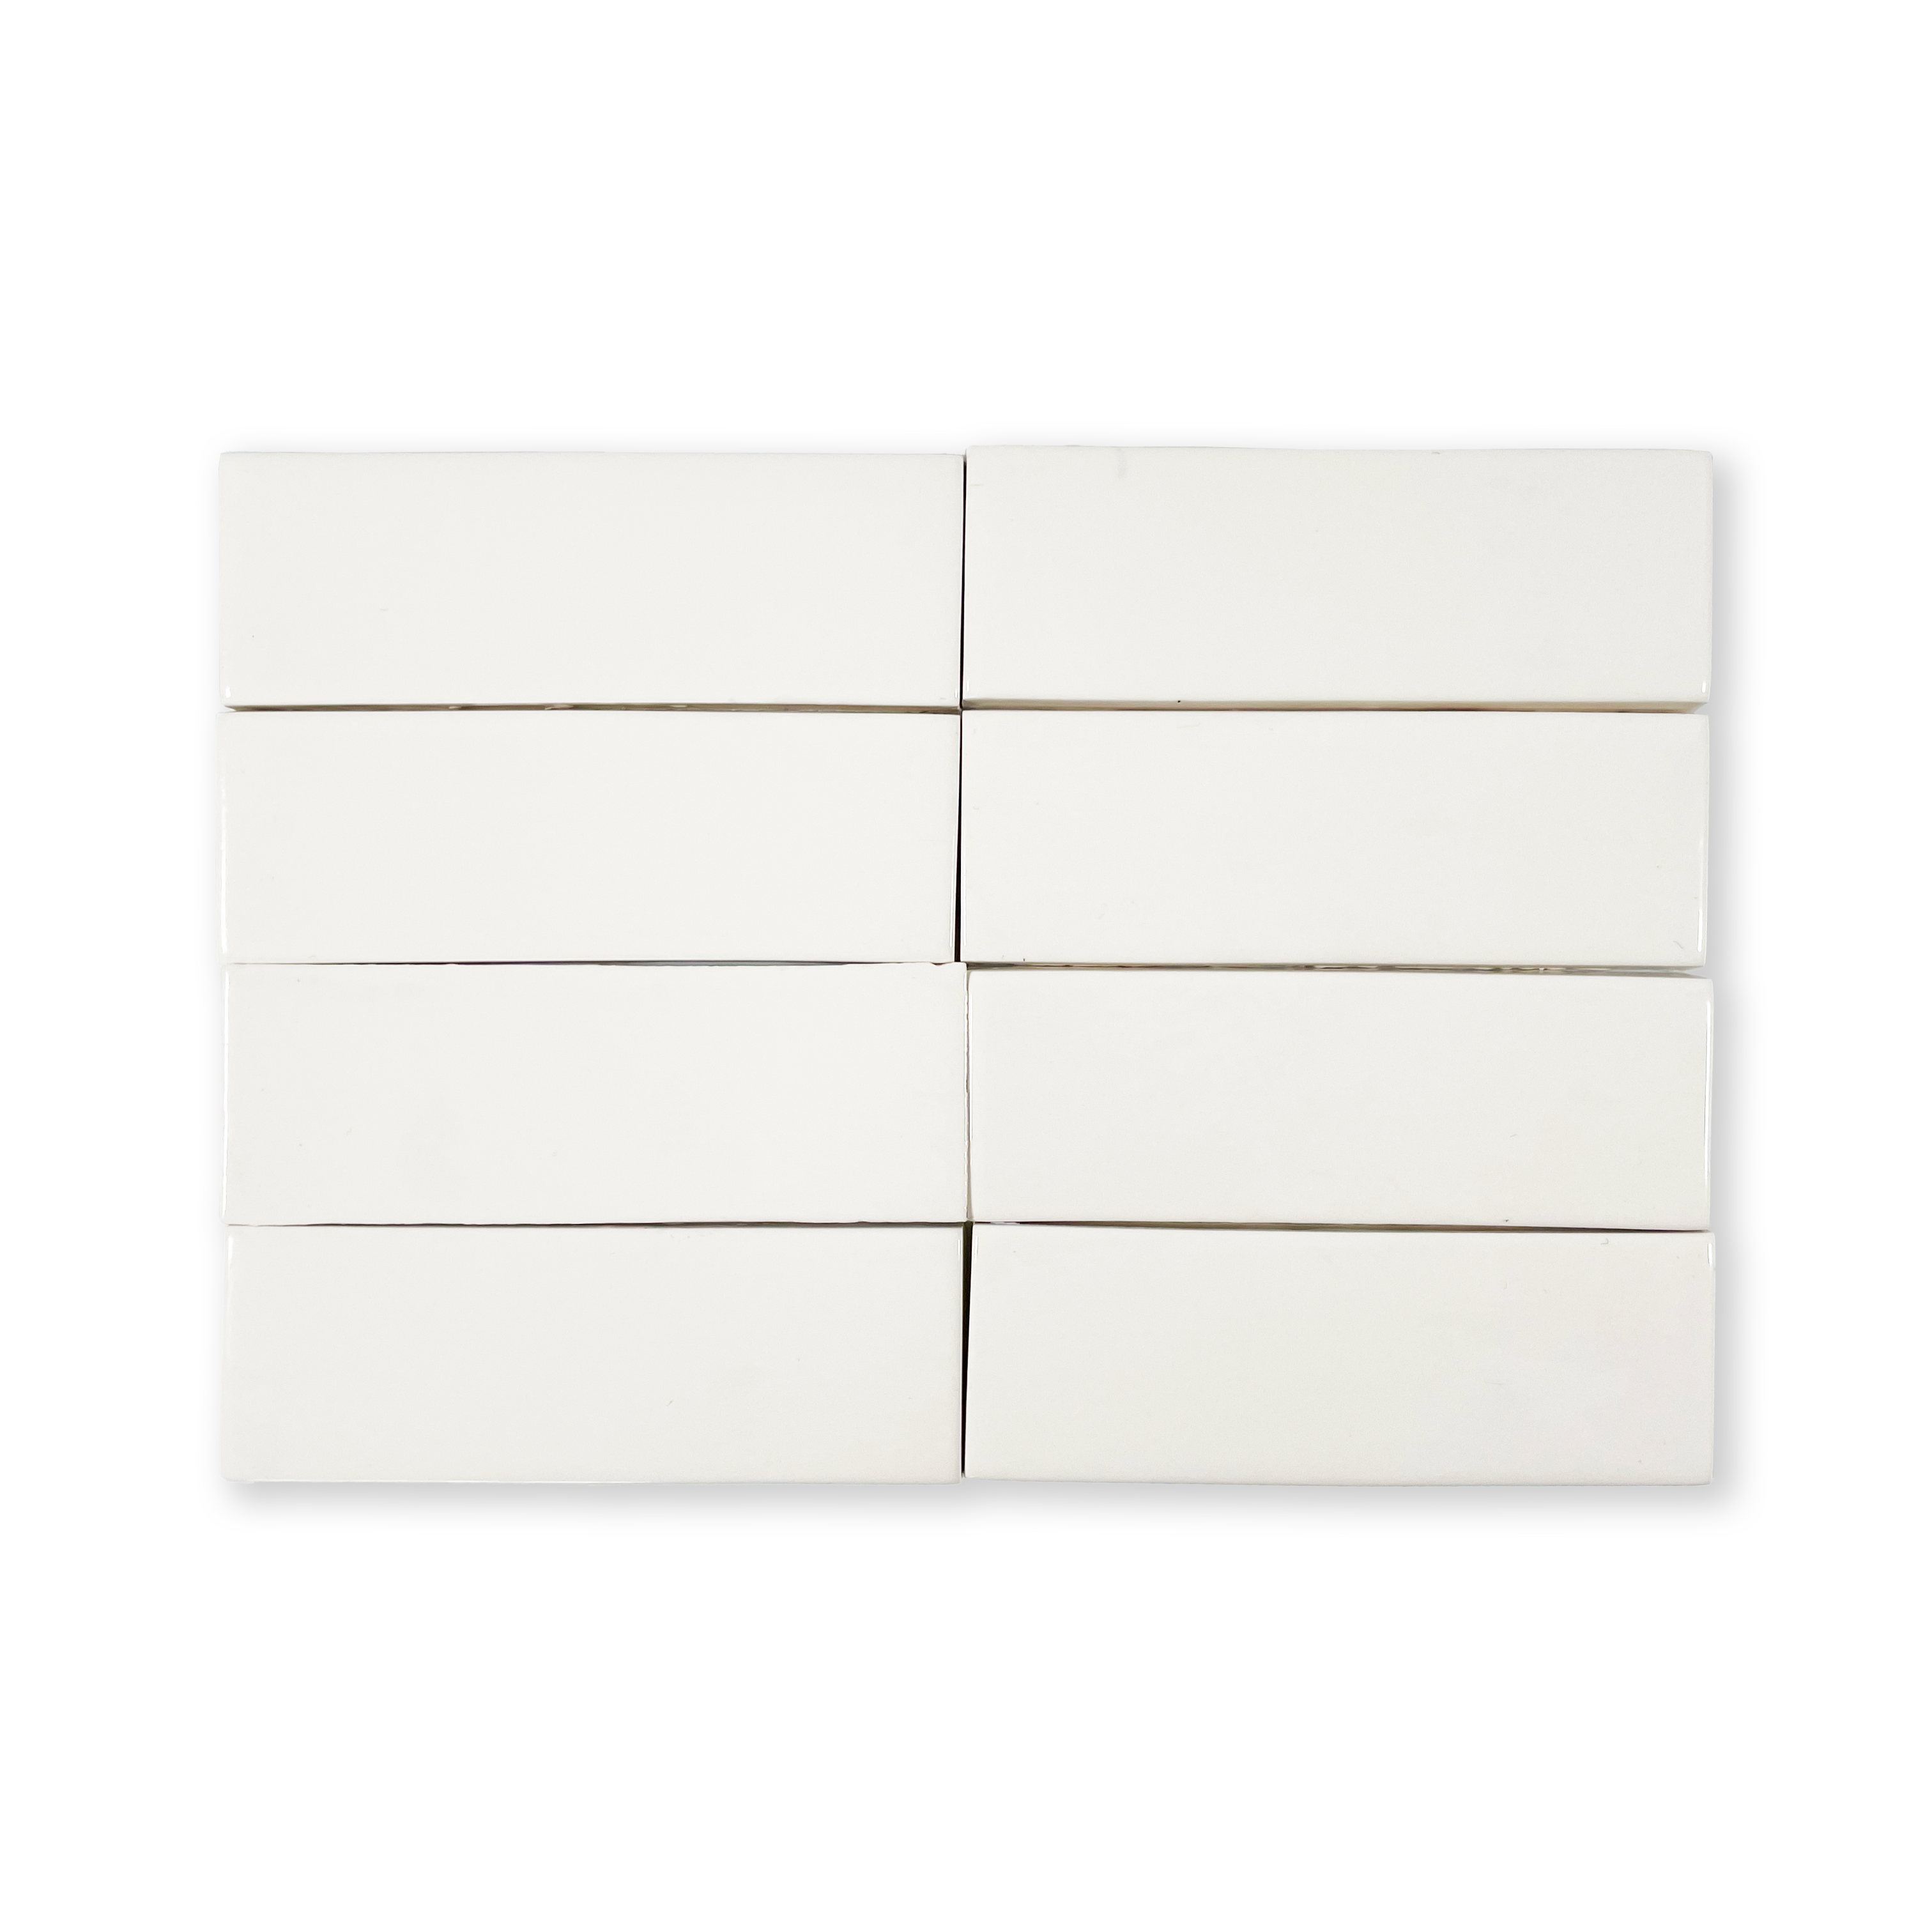 Extruded Handmade 2x6 Pearl White Glossy Subway Tile